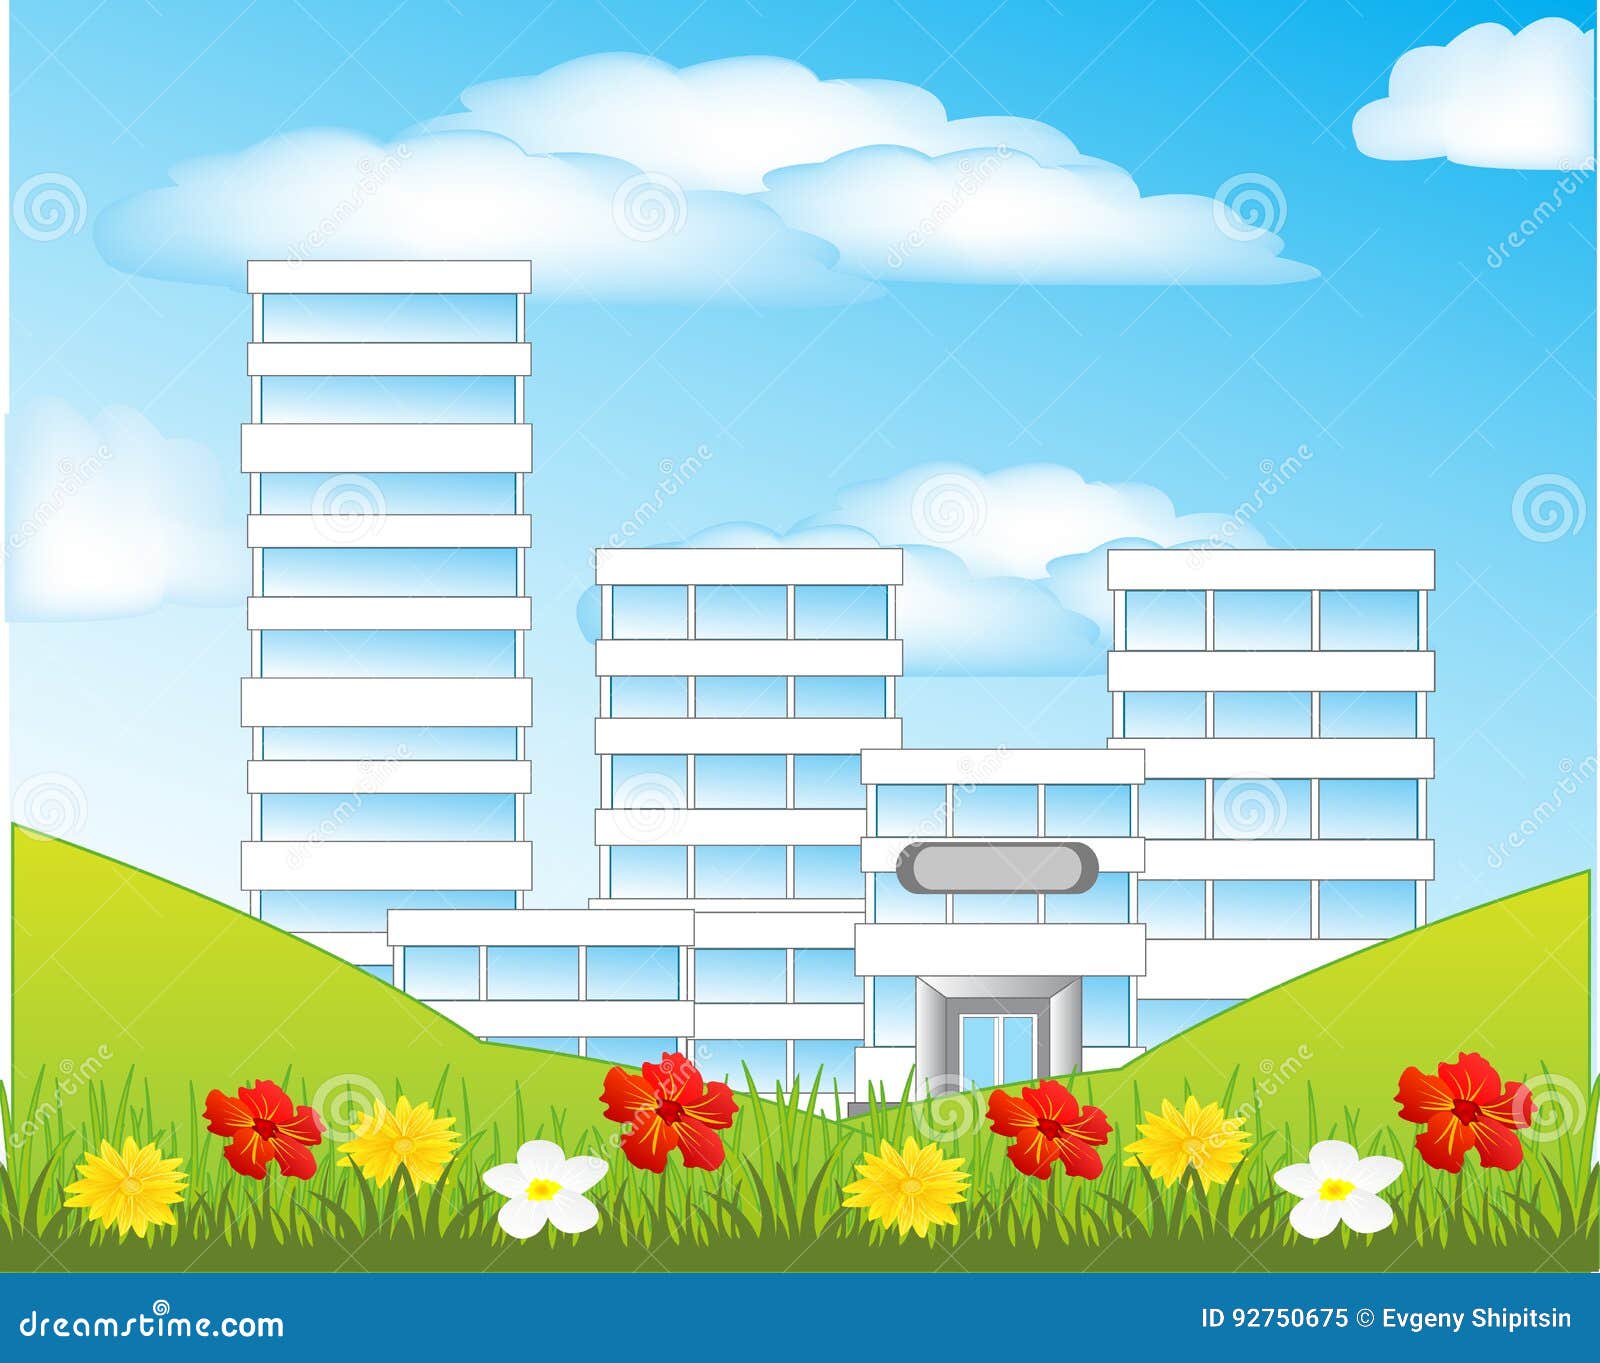 Nature and city stock vector. Illustration of premises - 92750675